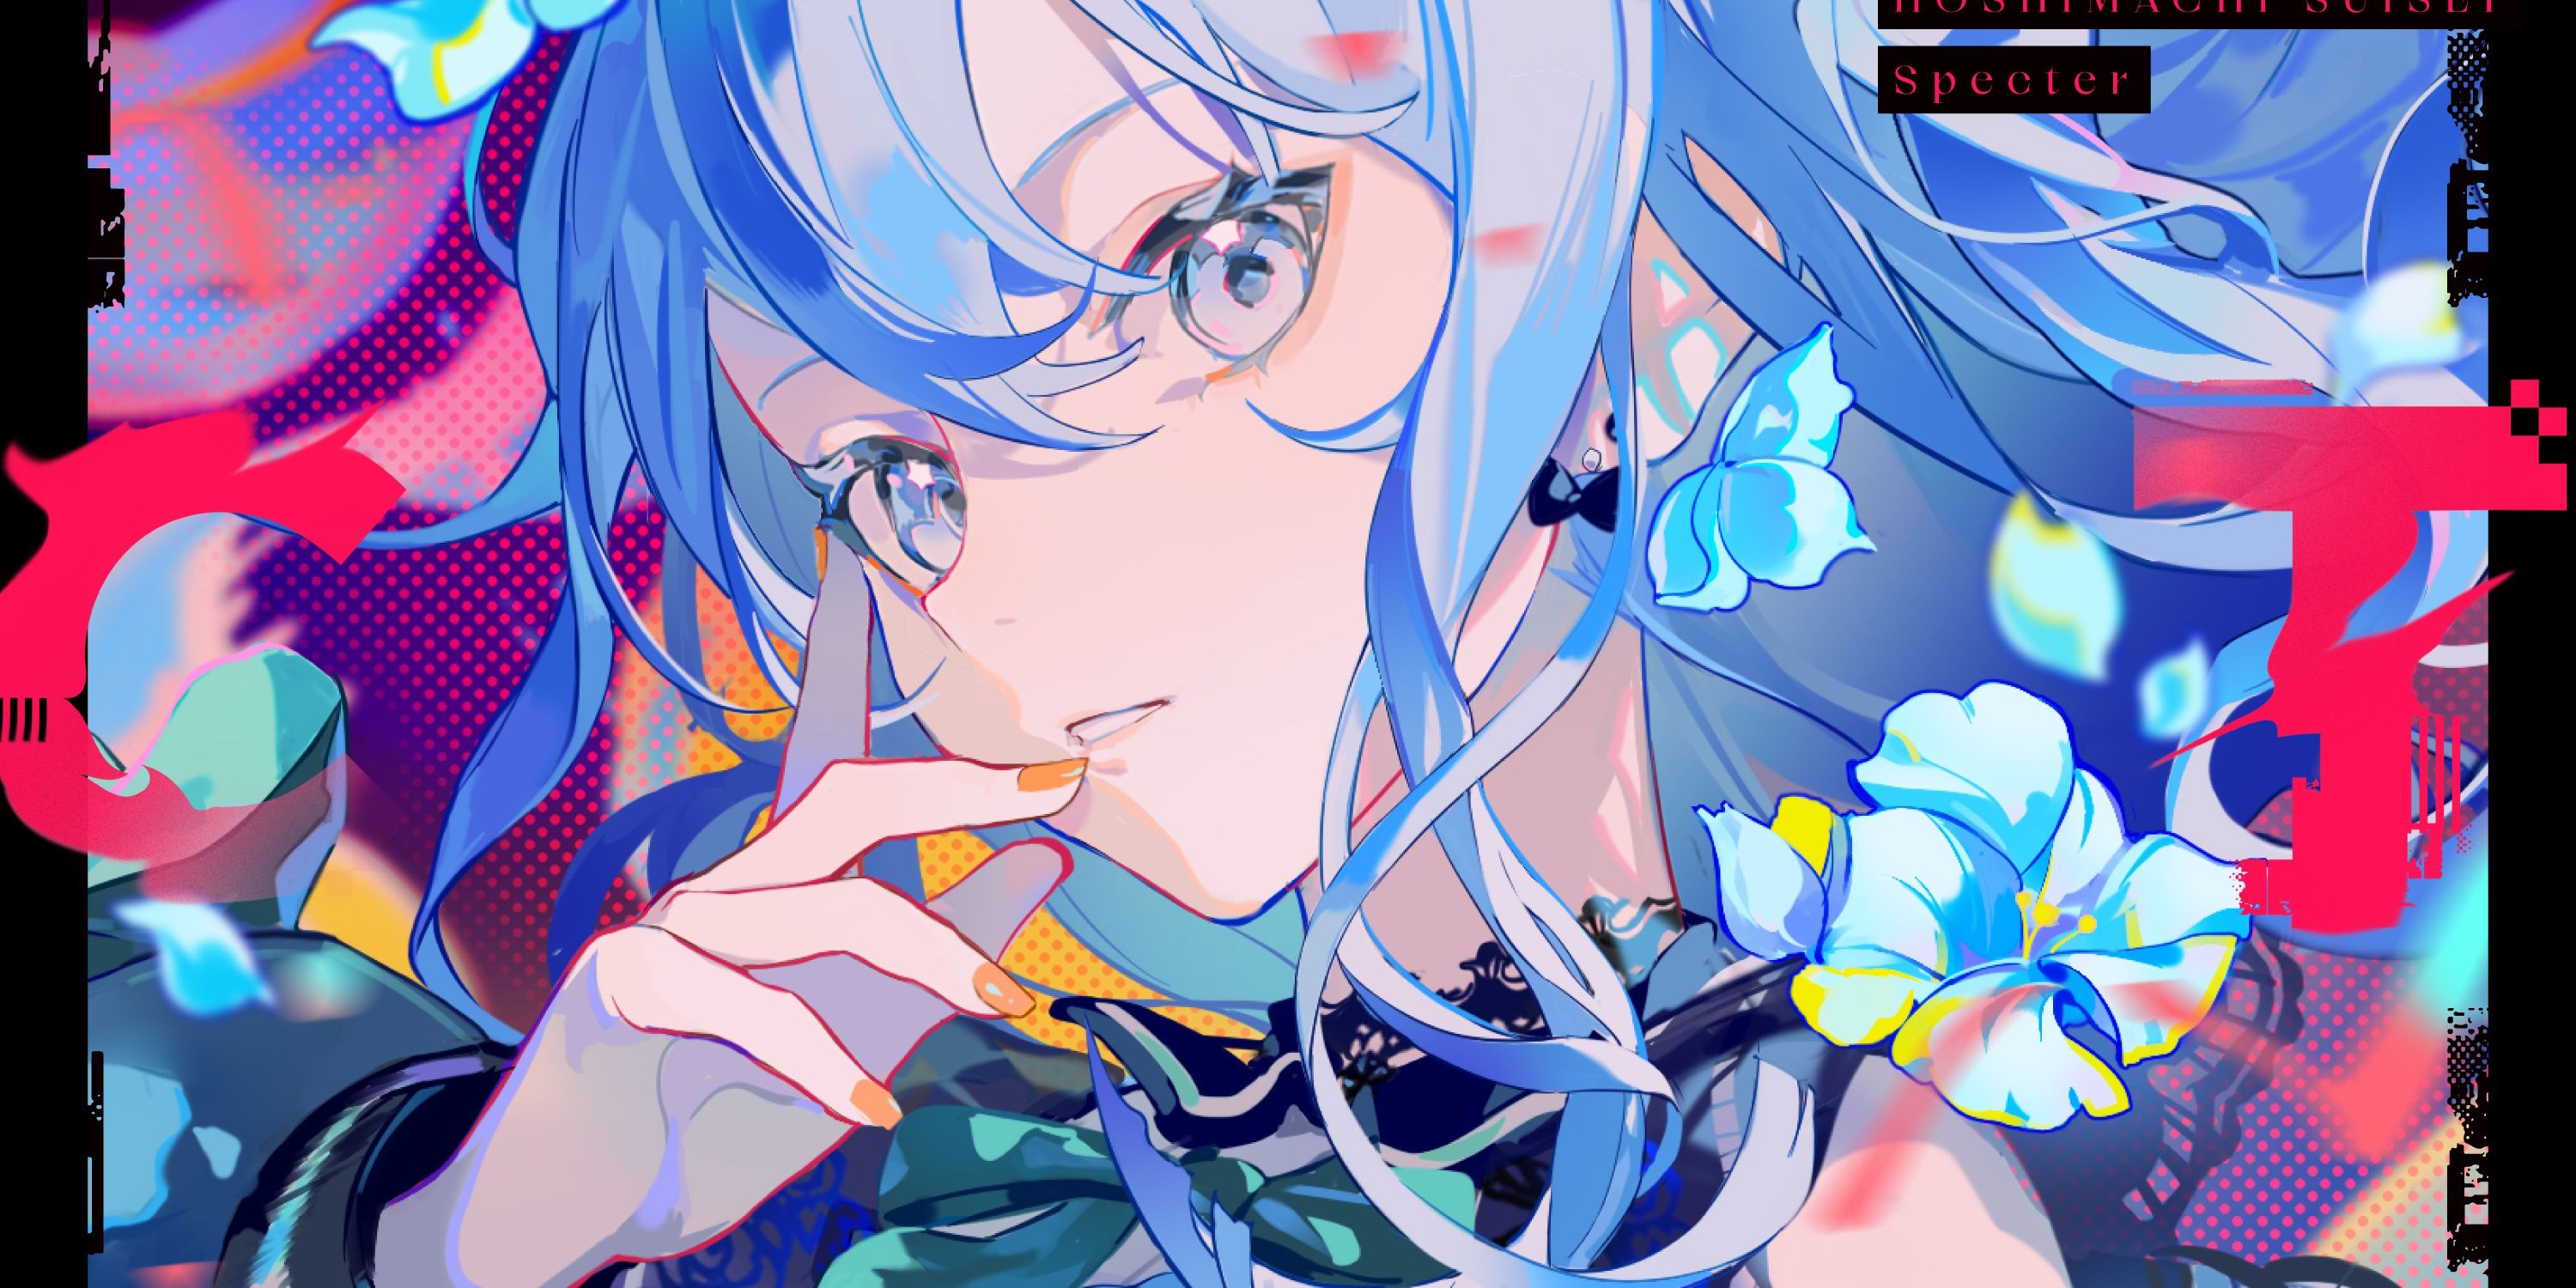 Image taken from Suisei's album, "Spectre", depicting her surrounded by blue flowers as she holds a hand to her face and looks at the screen.